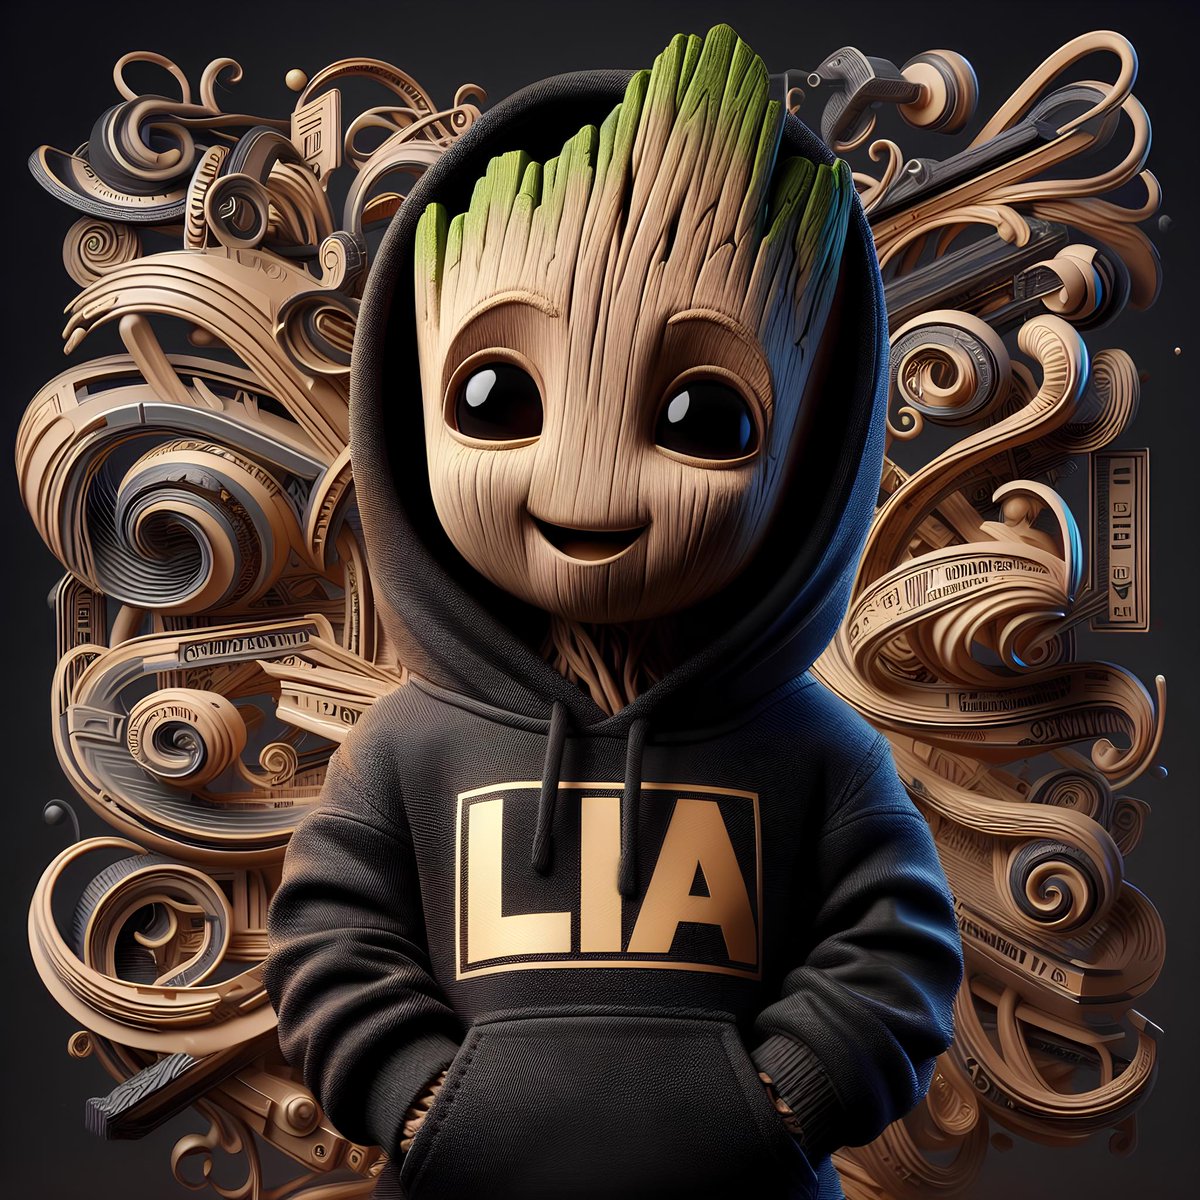 💚baby Groot Team Lia 💚
#ai #aiart #AIArtwork #AIgenerated #aiart #AIArtistCommunity #aiimages #babygroot #aicreato